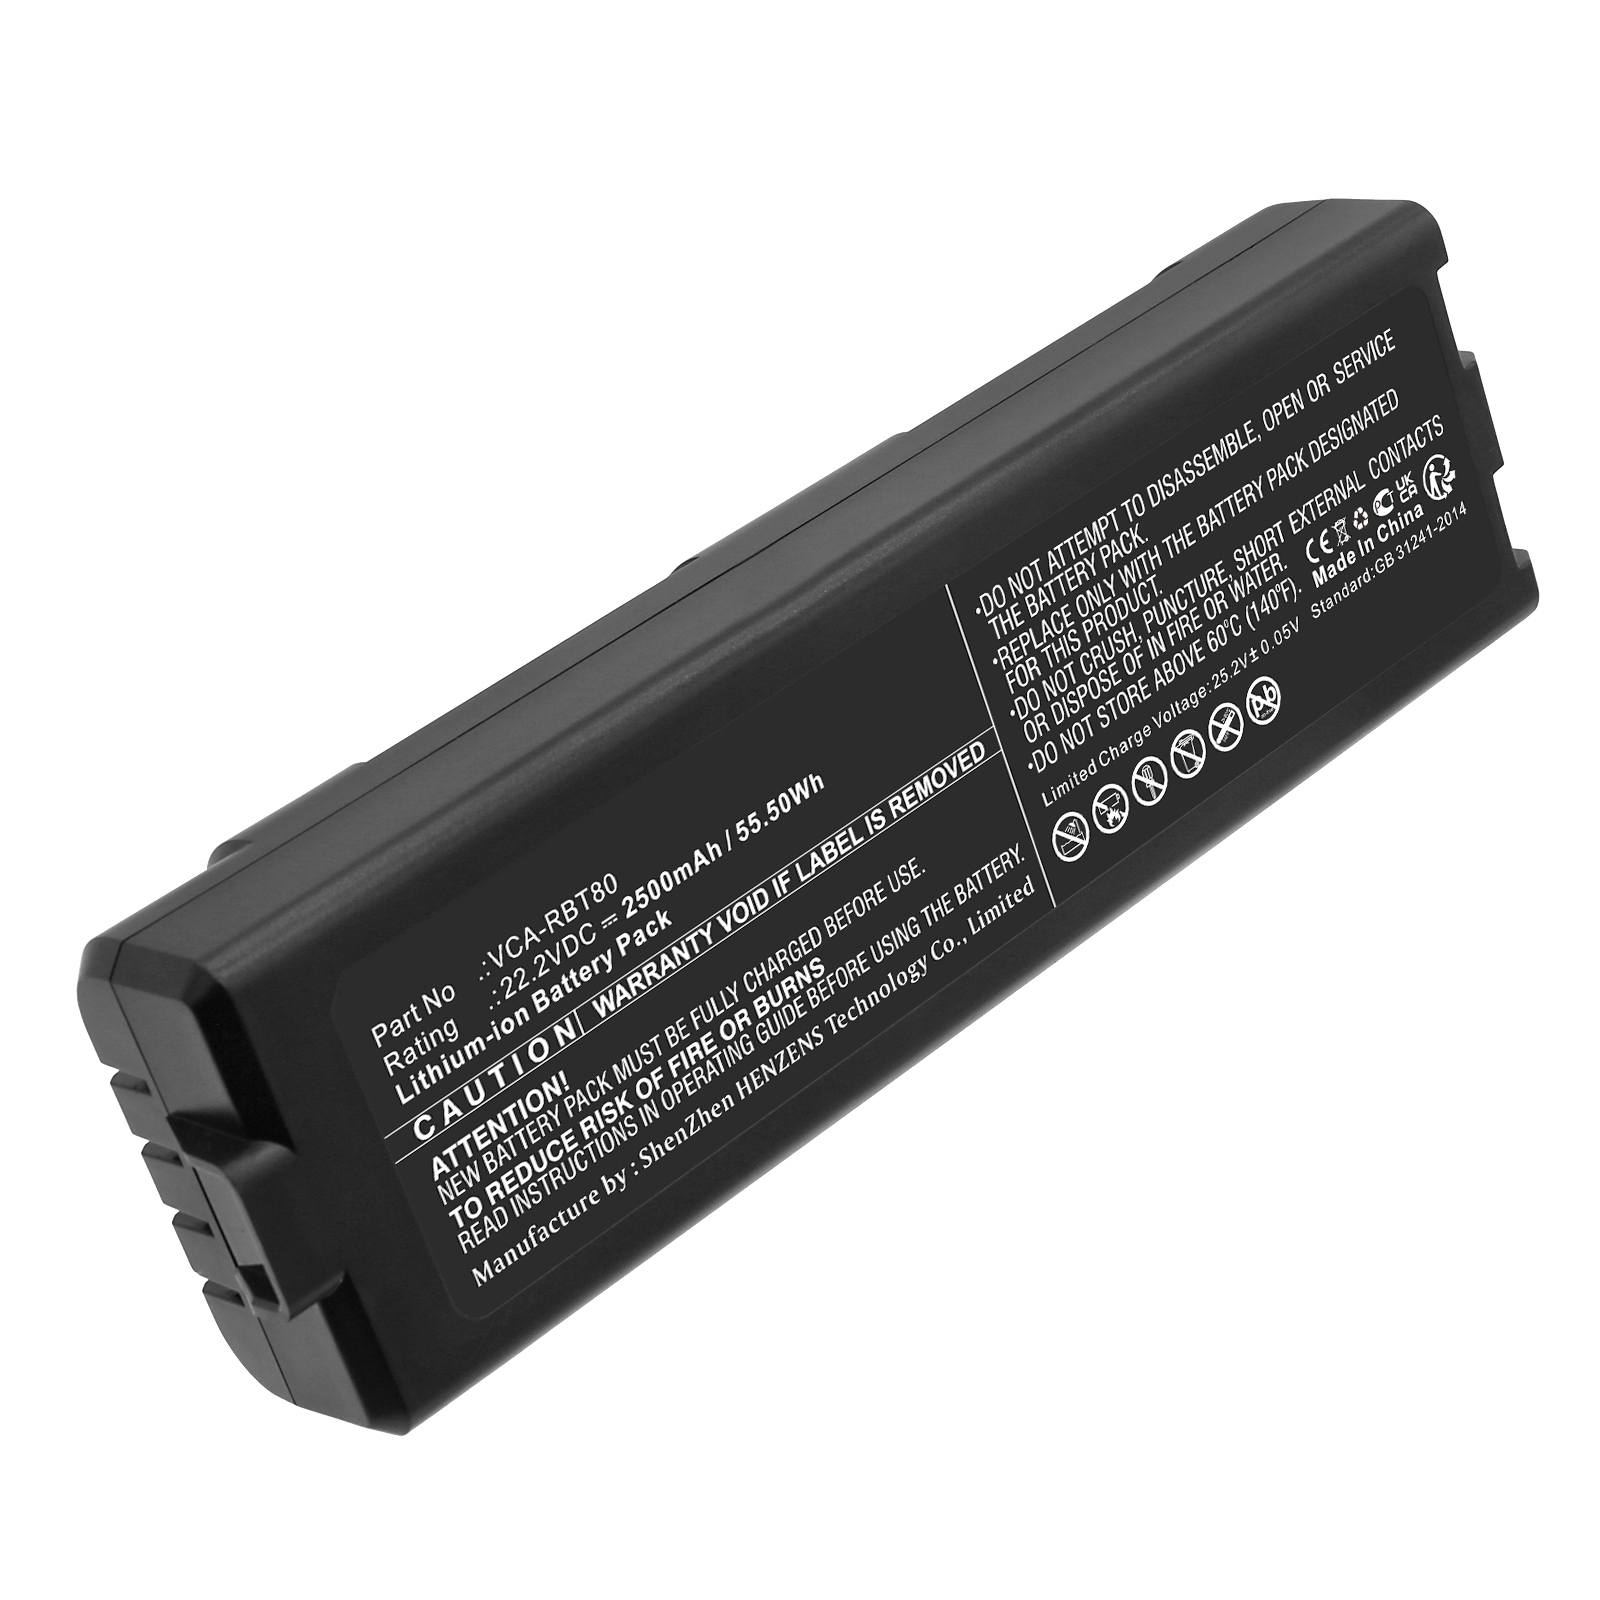 Batteries for SamsungVacuum Cleaner